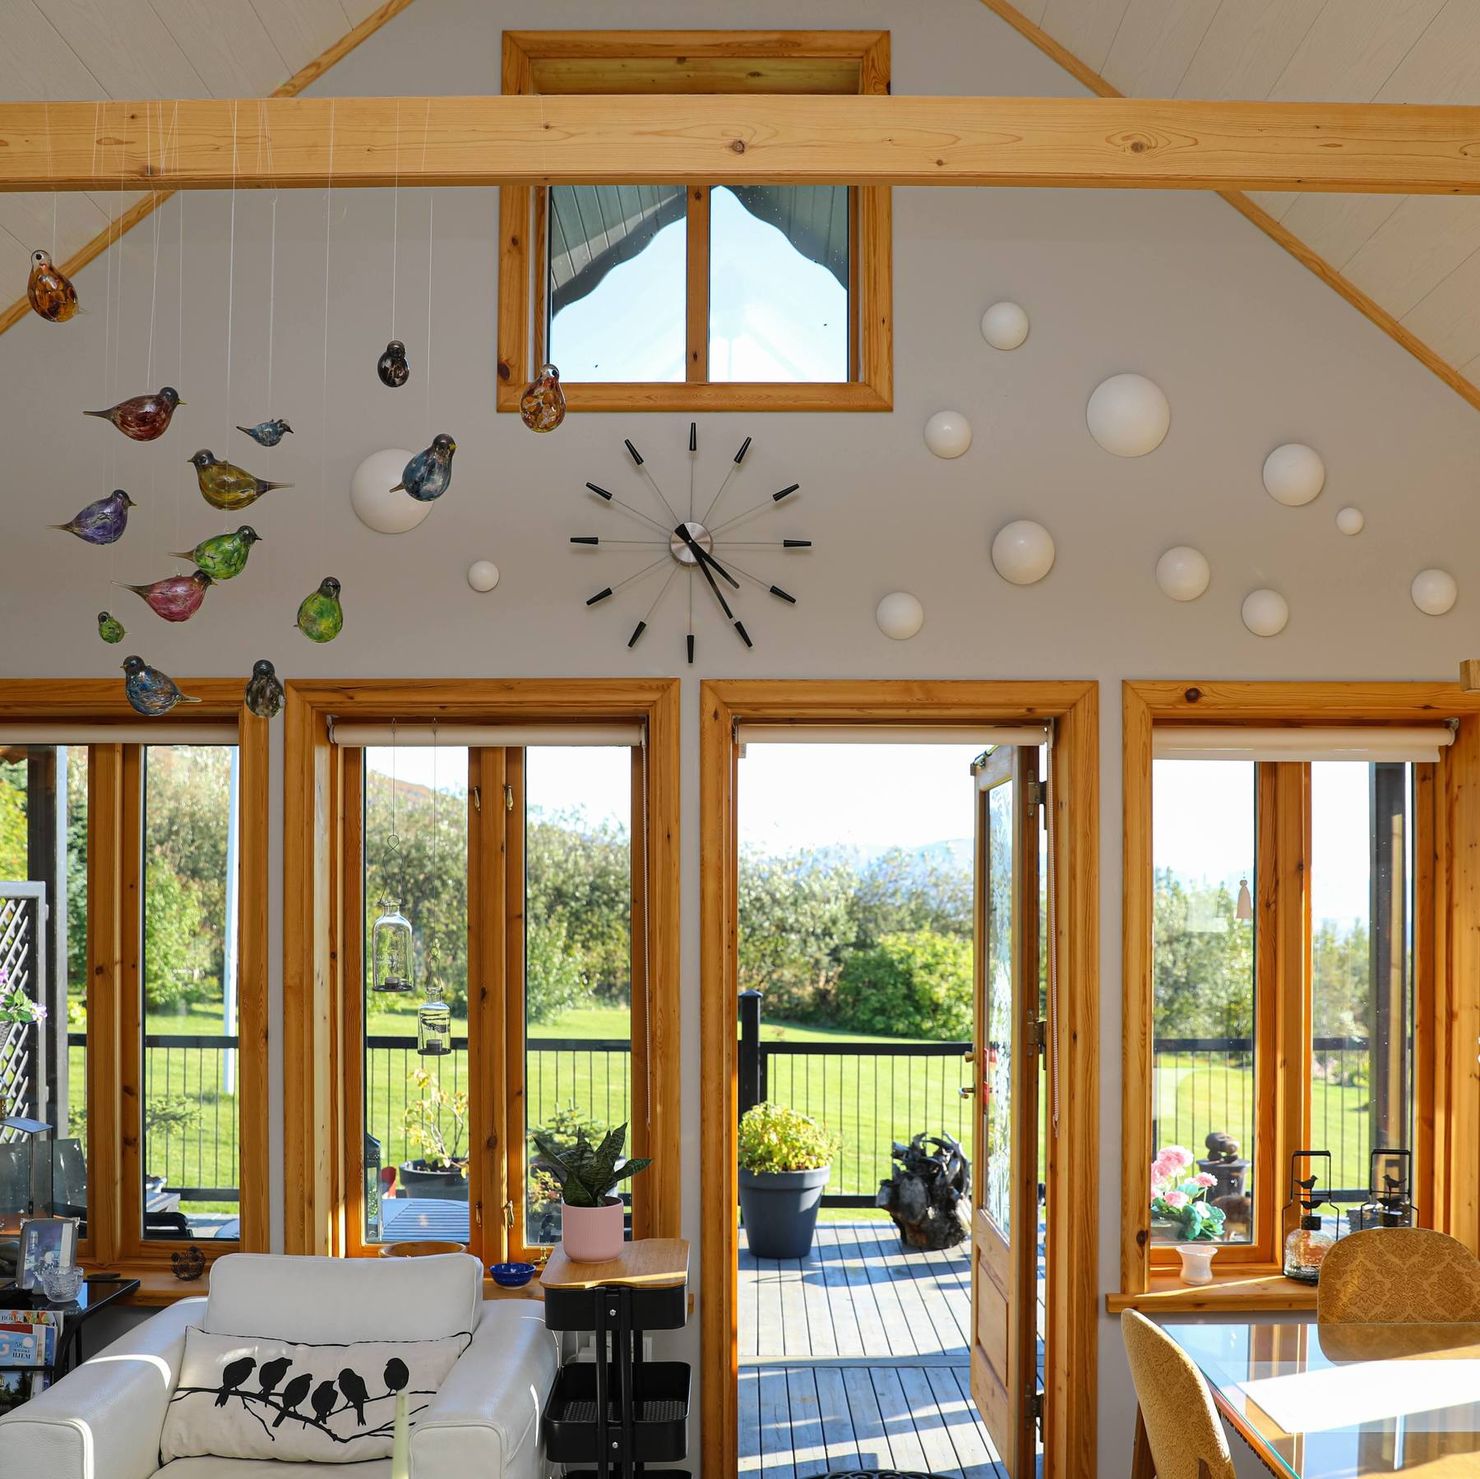 Panoramic windows surround the entire living area and provide a bright atmosphere in the holiday home